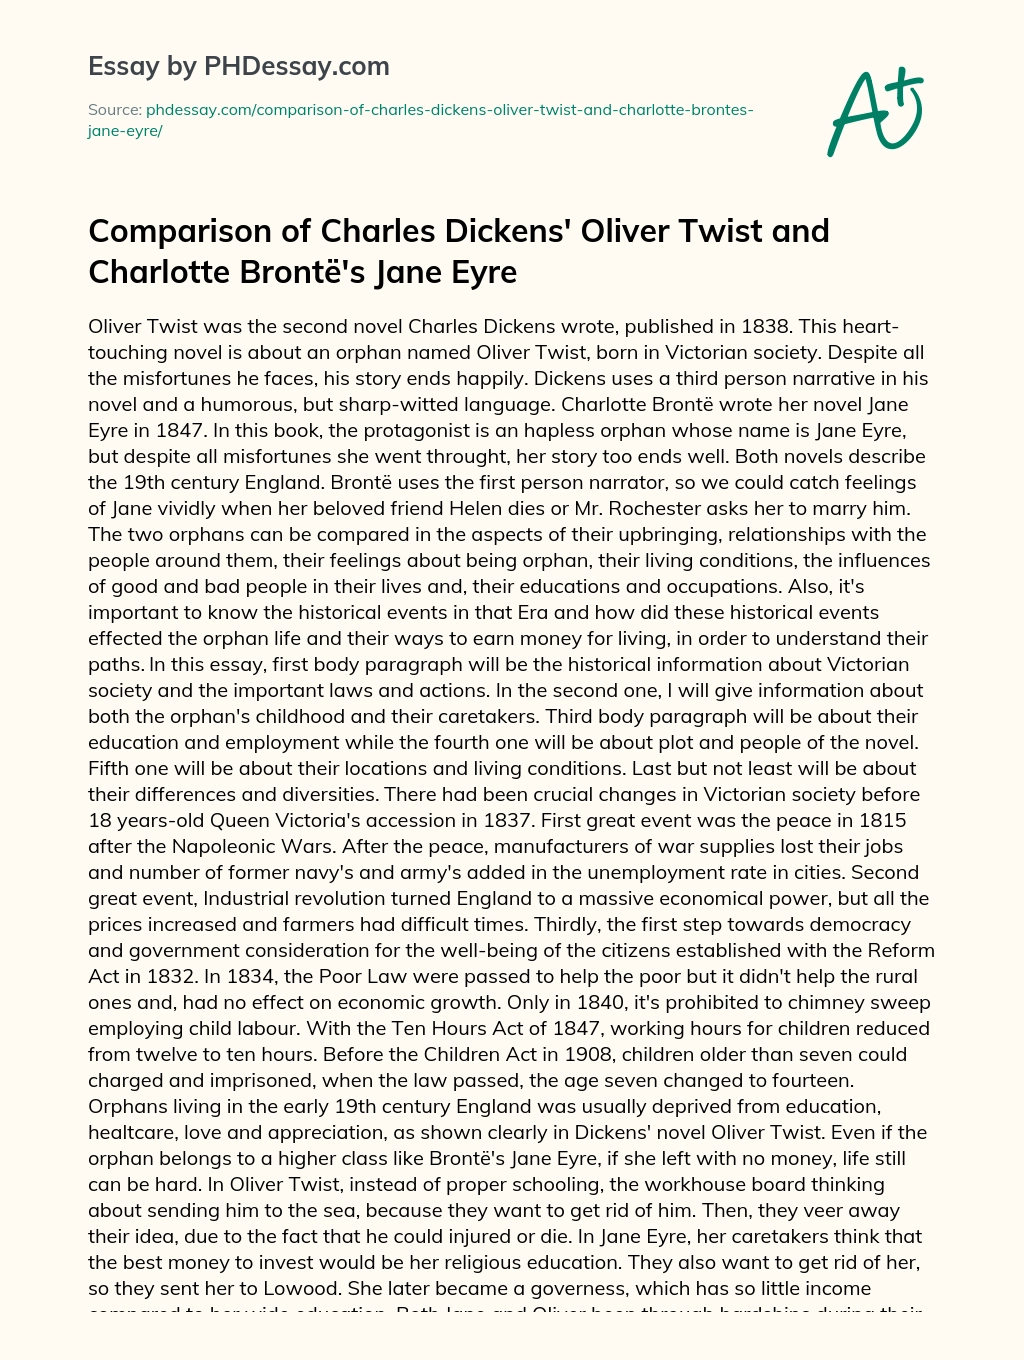 Comparison of Charles Dickens’ Oliver Twist and Charlotte Brontë’s Jane Eyre essay